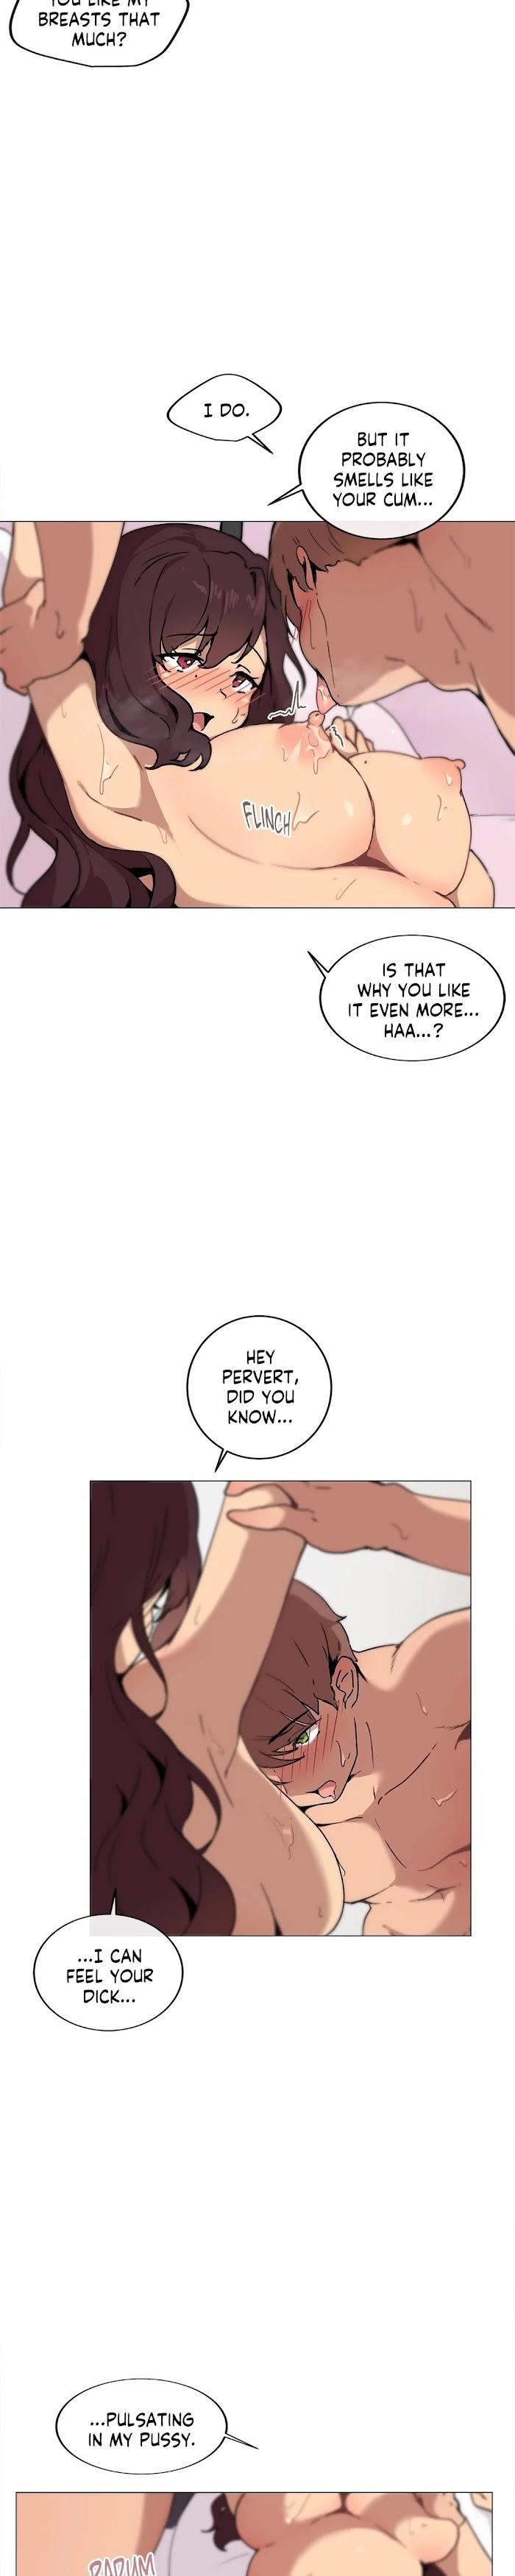 [Dumangoon, 130F] Sexcape Room: Wipe Out Ch.9/9 [English] [Manhwa PDF] Completed 157